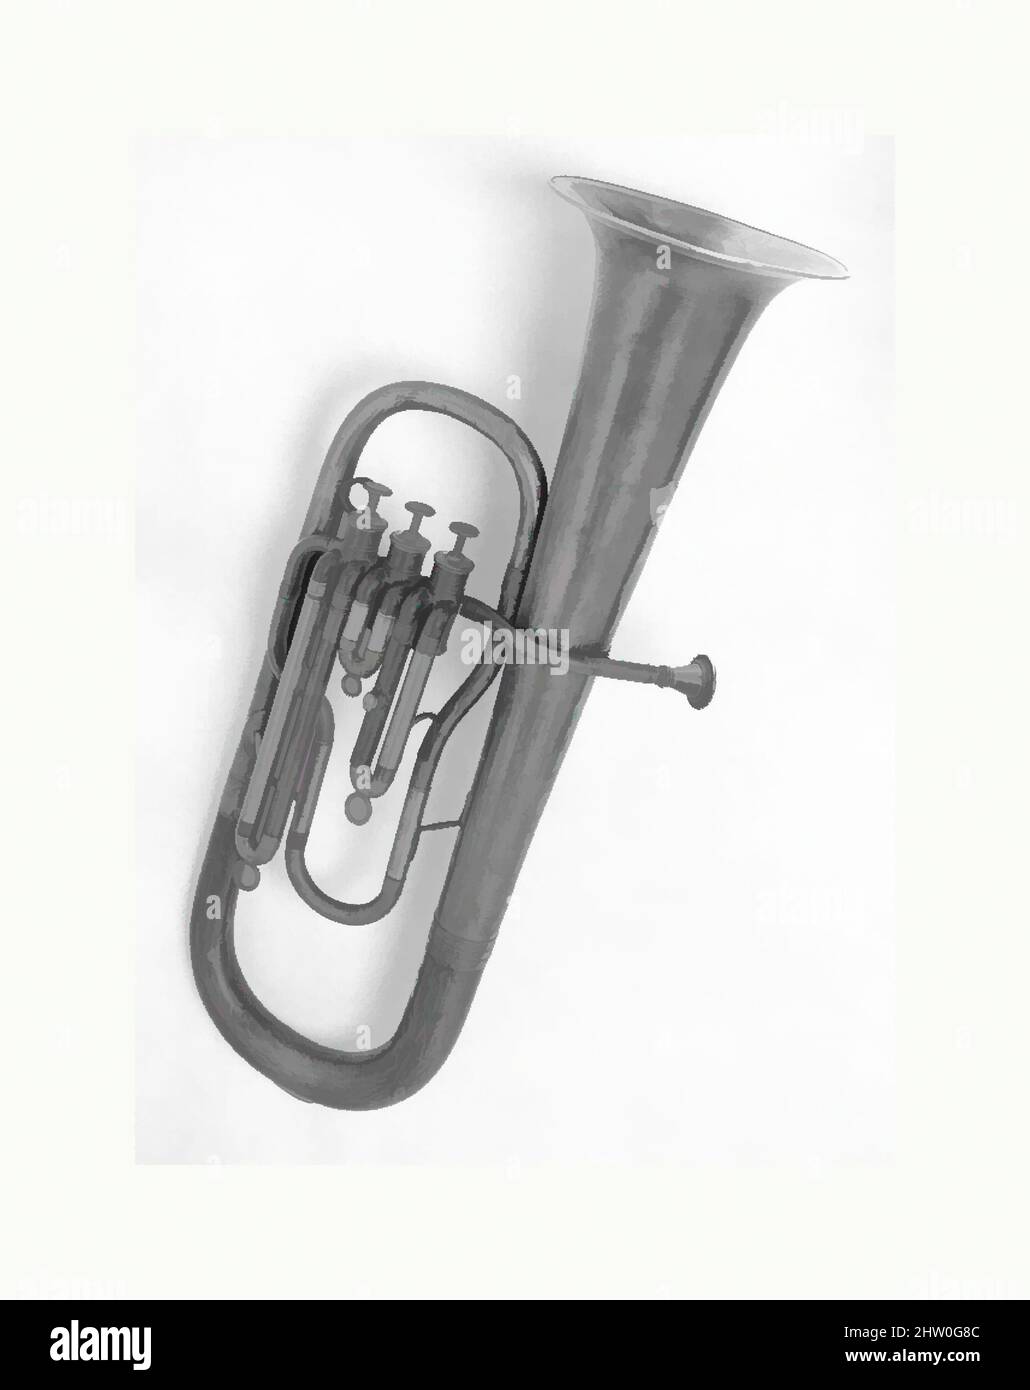 Art inspired by Baritone Saxhorn in B-flat, 1865–68, New York, New York, United States, American, Brass, nickel-silver, L.: 76.5 cm (30-1/8 in.); Diam. of bel: 21.9 cm (8-5/8 in.), Aerophone-Lip Vibrated, M. Slater, Classic works modernized by Artotop with a splash of modernity. Shapes, color and value, eye-catching visual impact on art. Emotions through freedom of artworks in a contemporary way. A timeless message pursuing a wildly creative new direction. Artists turning to the digital medium and creating the Artotop NFT Stock Photo